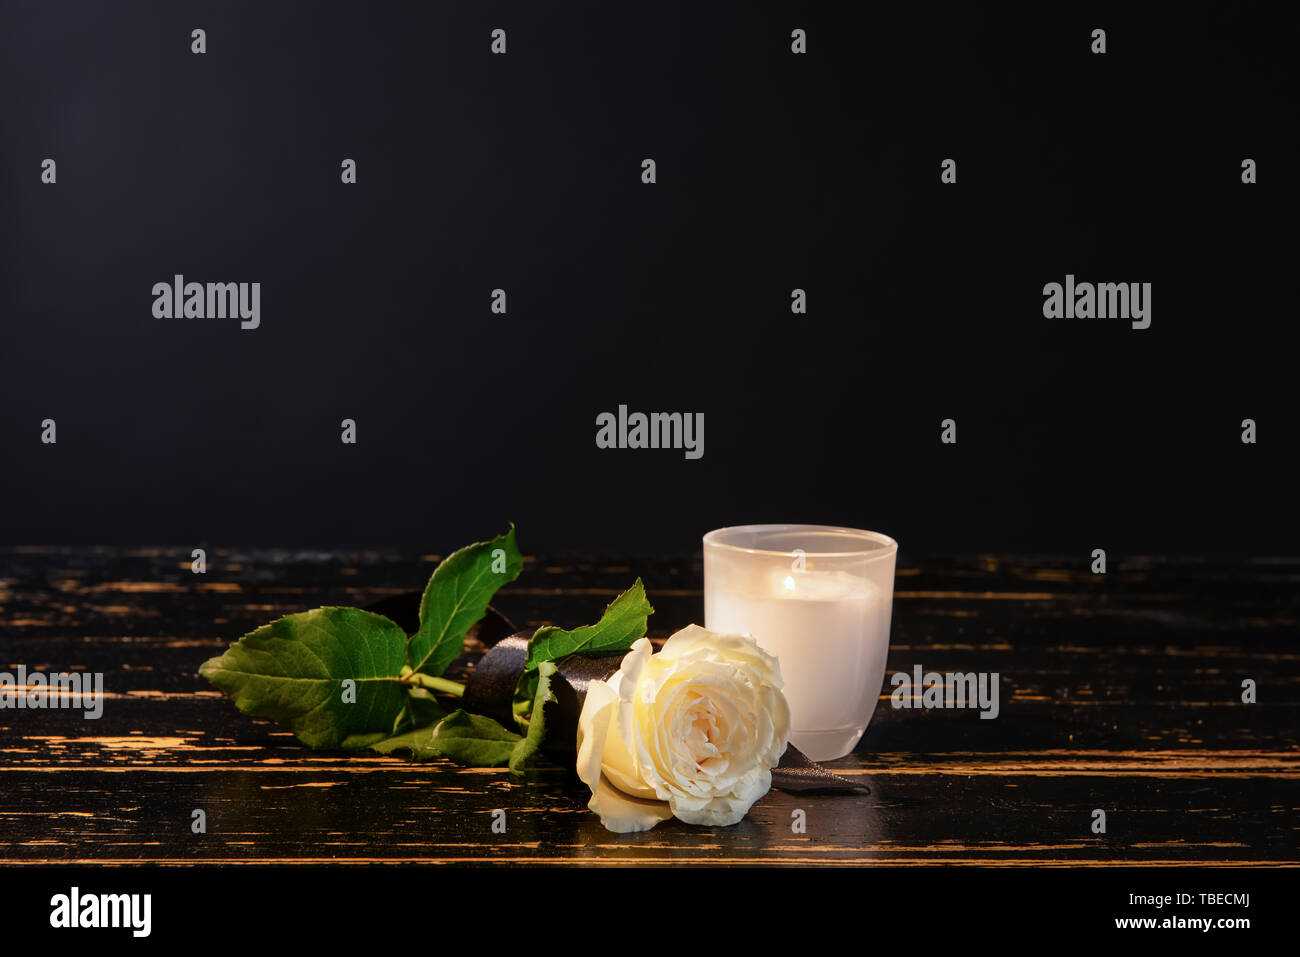 Burning candle and flower on table against black background Stock Photo